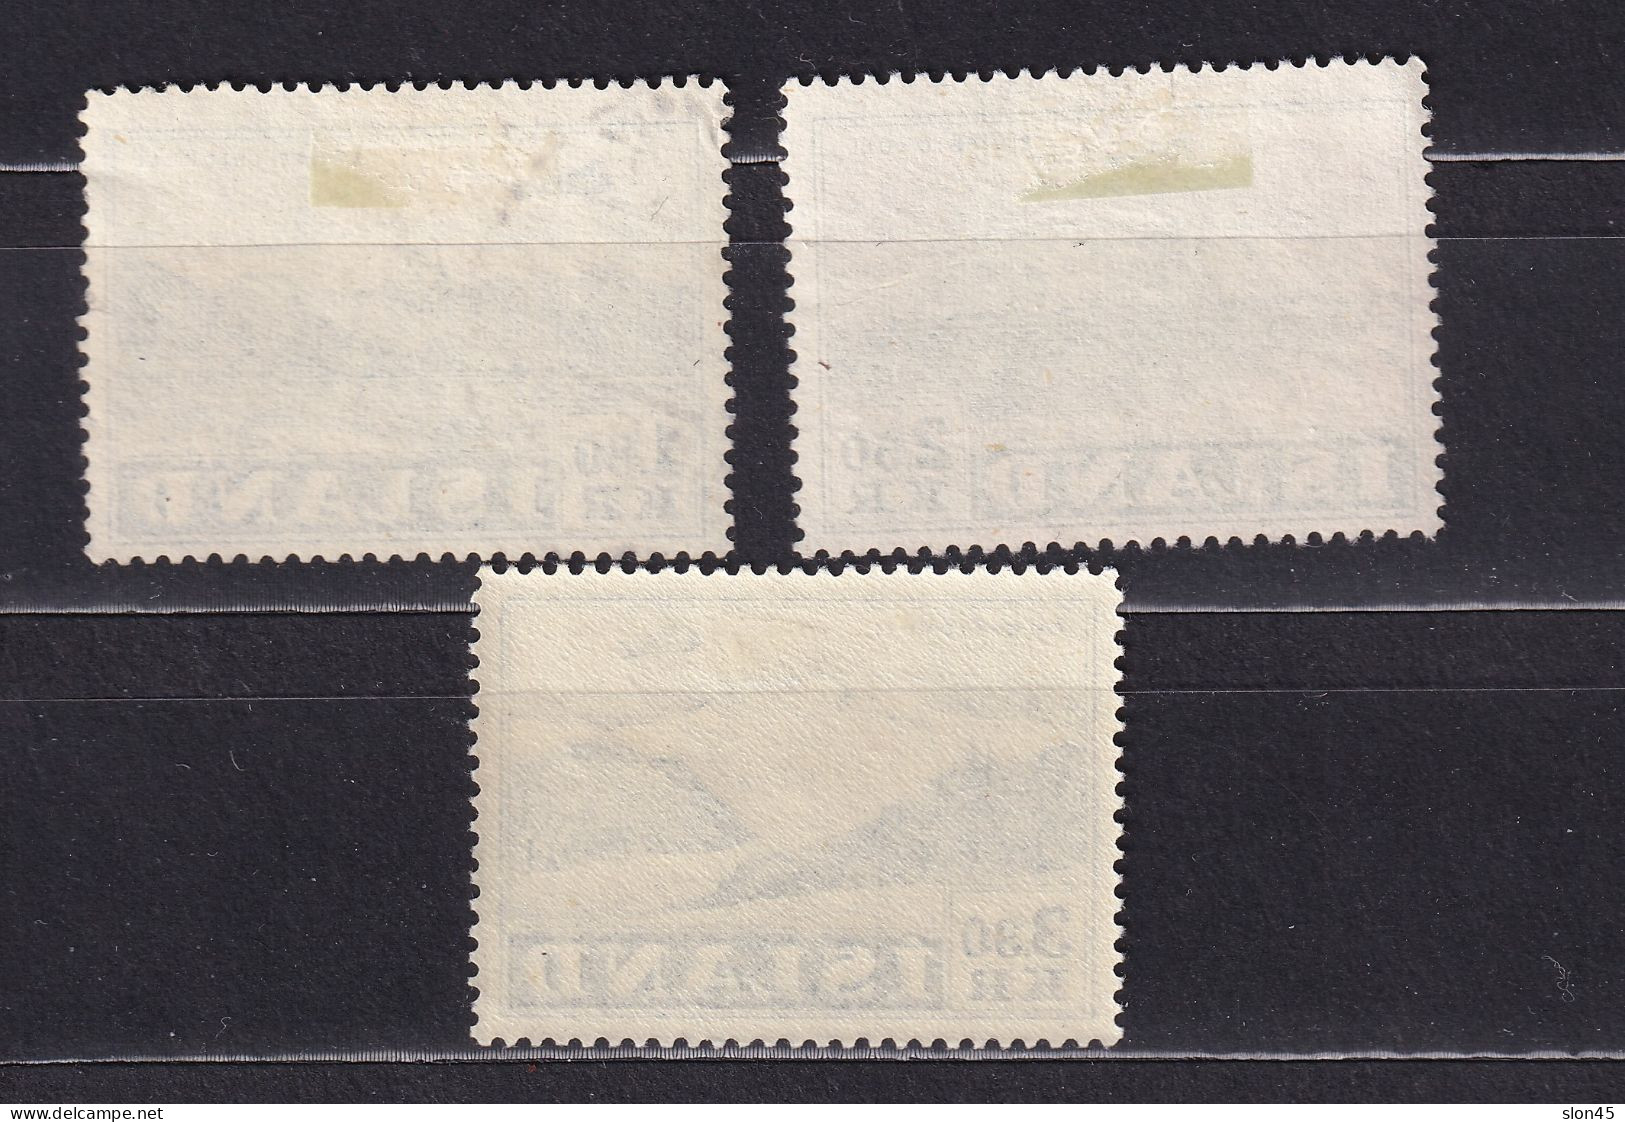 Iceland 1952 Air Post MH/Used Sc C27-9 15676 - Used Stamps